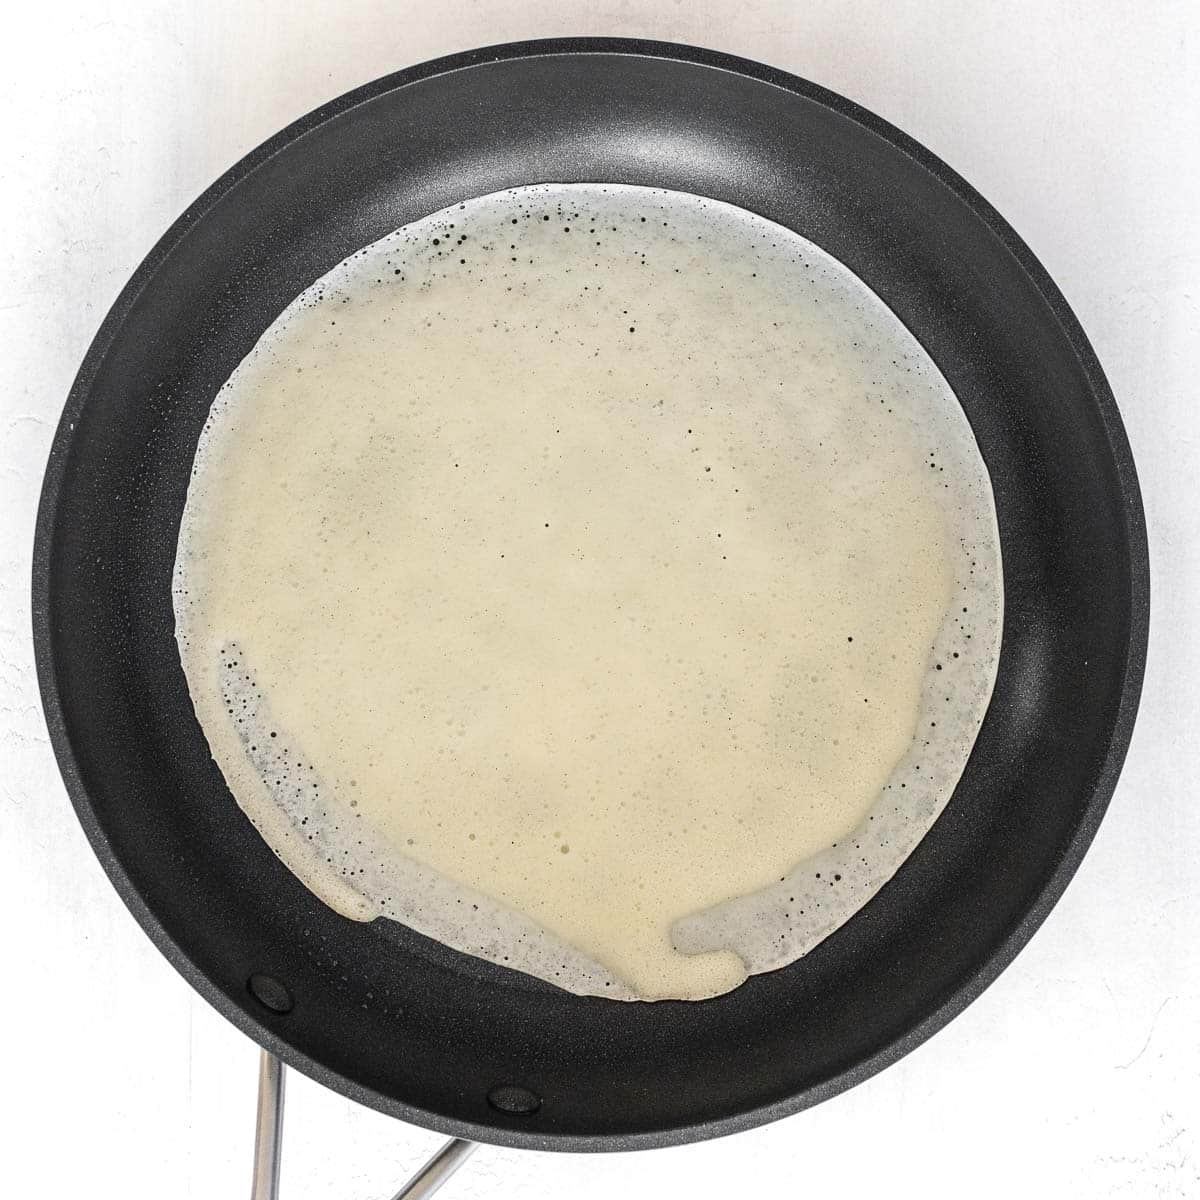 crepe cooking on a pan